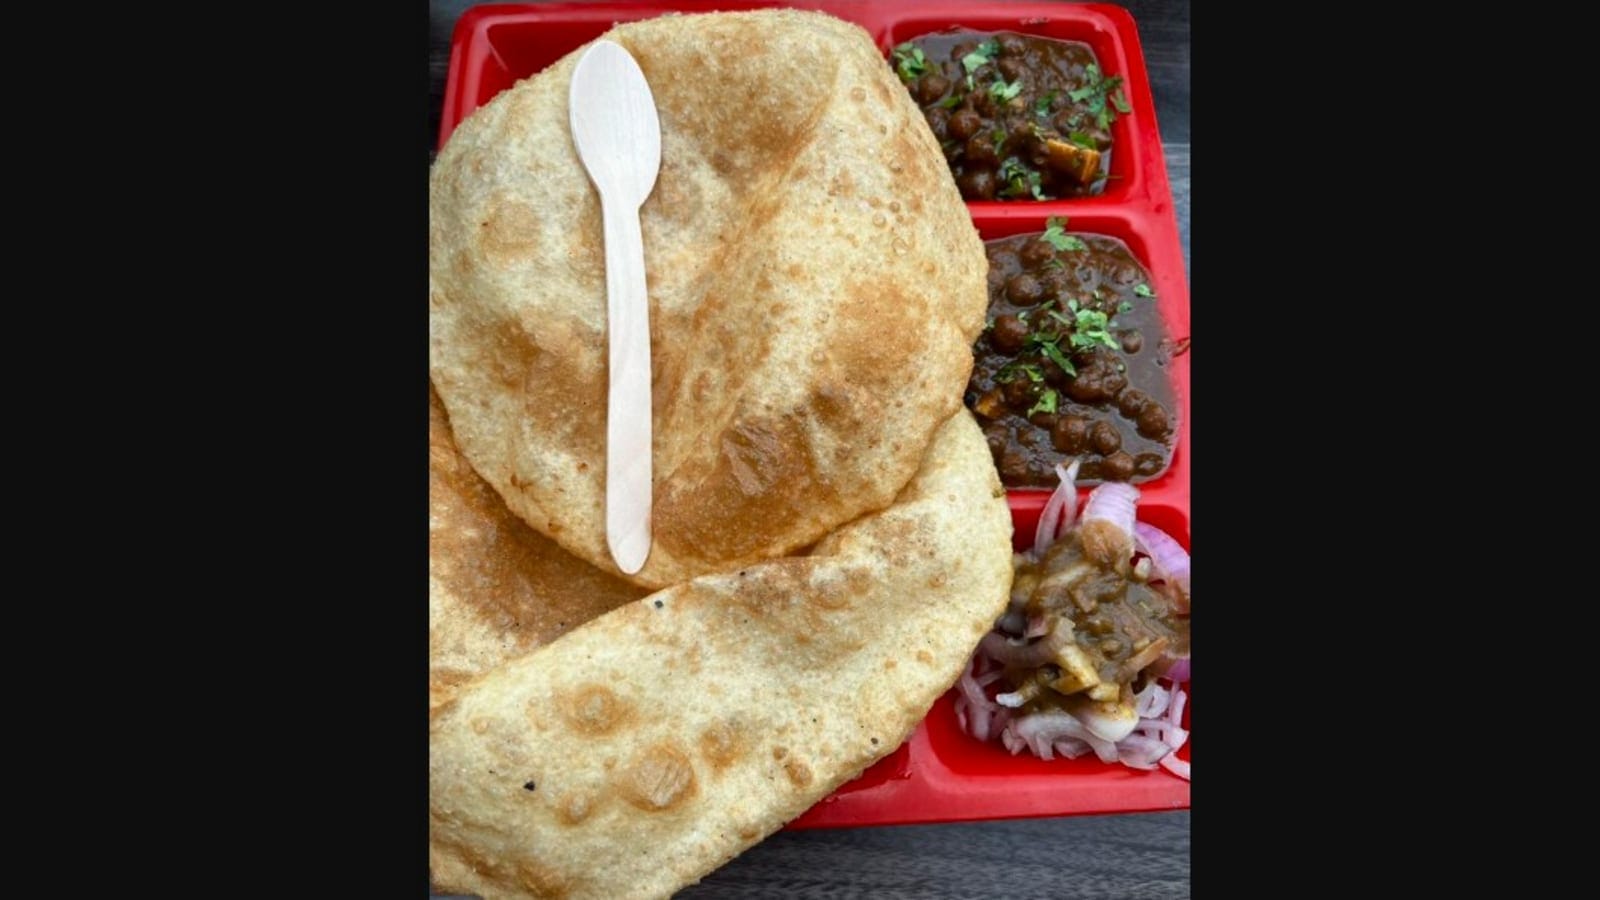 Fitness Influencer says he will ‘never understand' how people eat chole bhature, netizens react